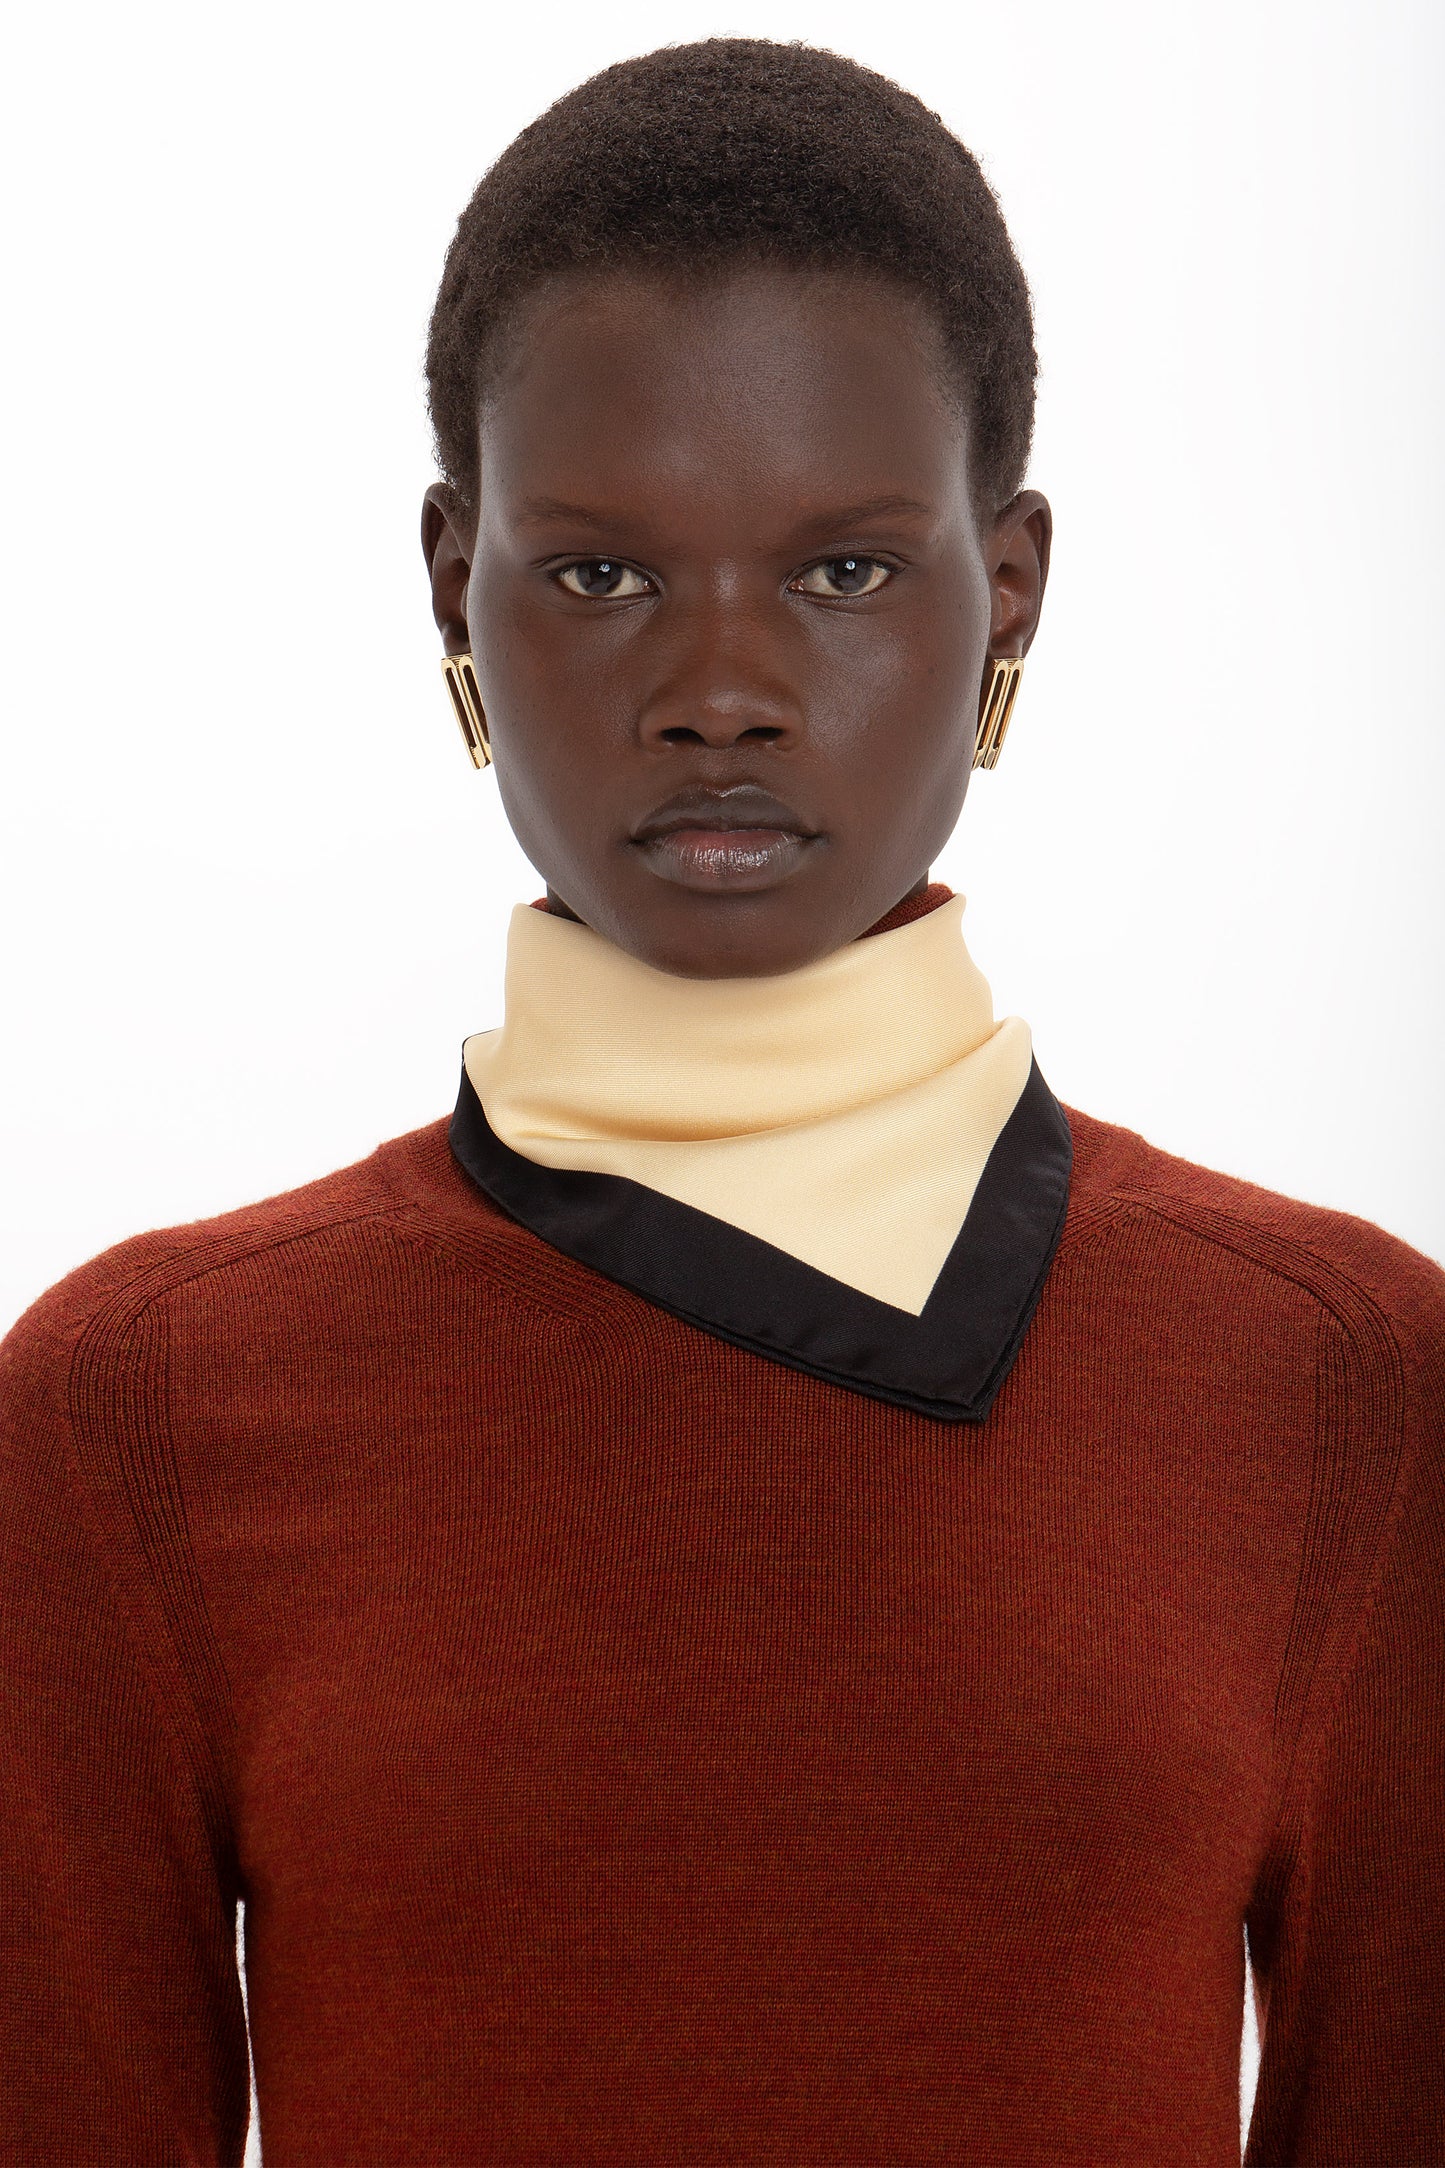 Person with short hair wearing a rust-colored sweater, a cream and black scarf, and gold geometric earrings, looking directly at the camera against a plain white background. The ensemble exudes sophisticated style akin to the Victoria Beckham High Neck Tie Detail Dress In Russet with merino wool bodices and asymmetric hemlines.